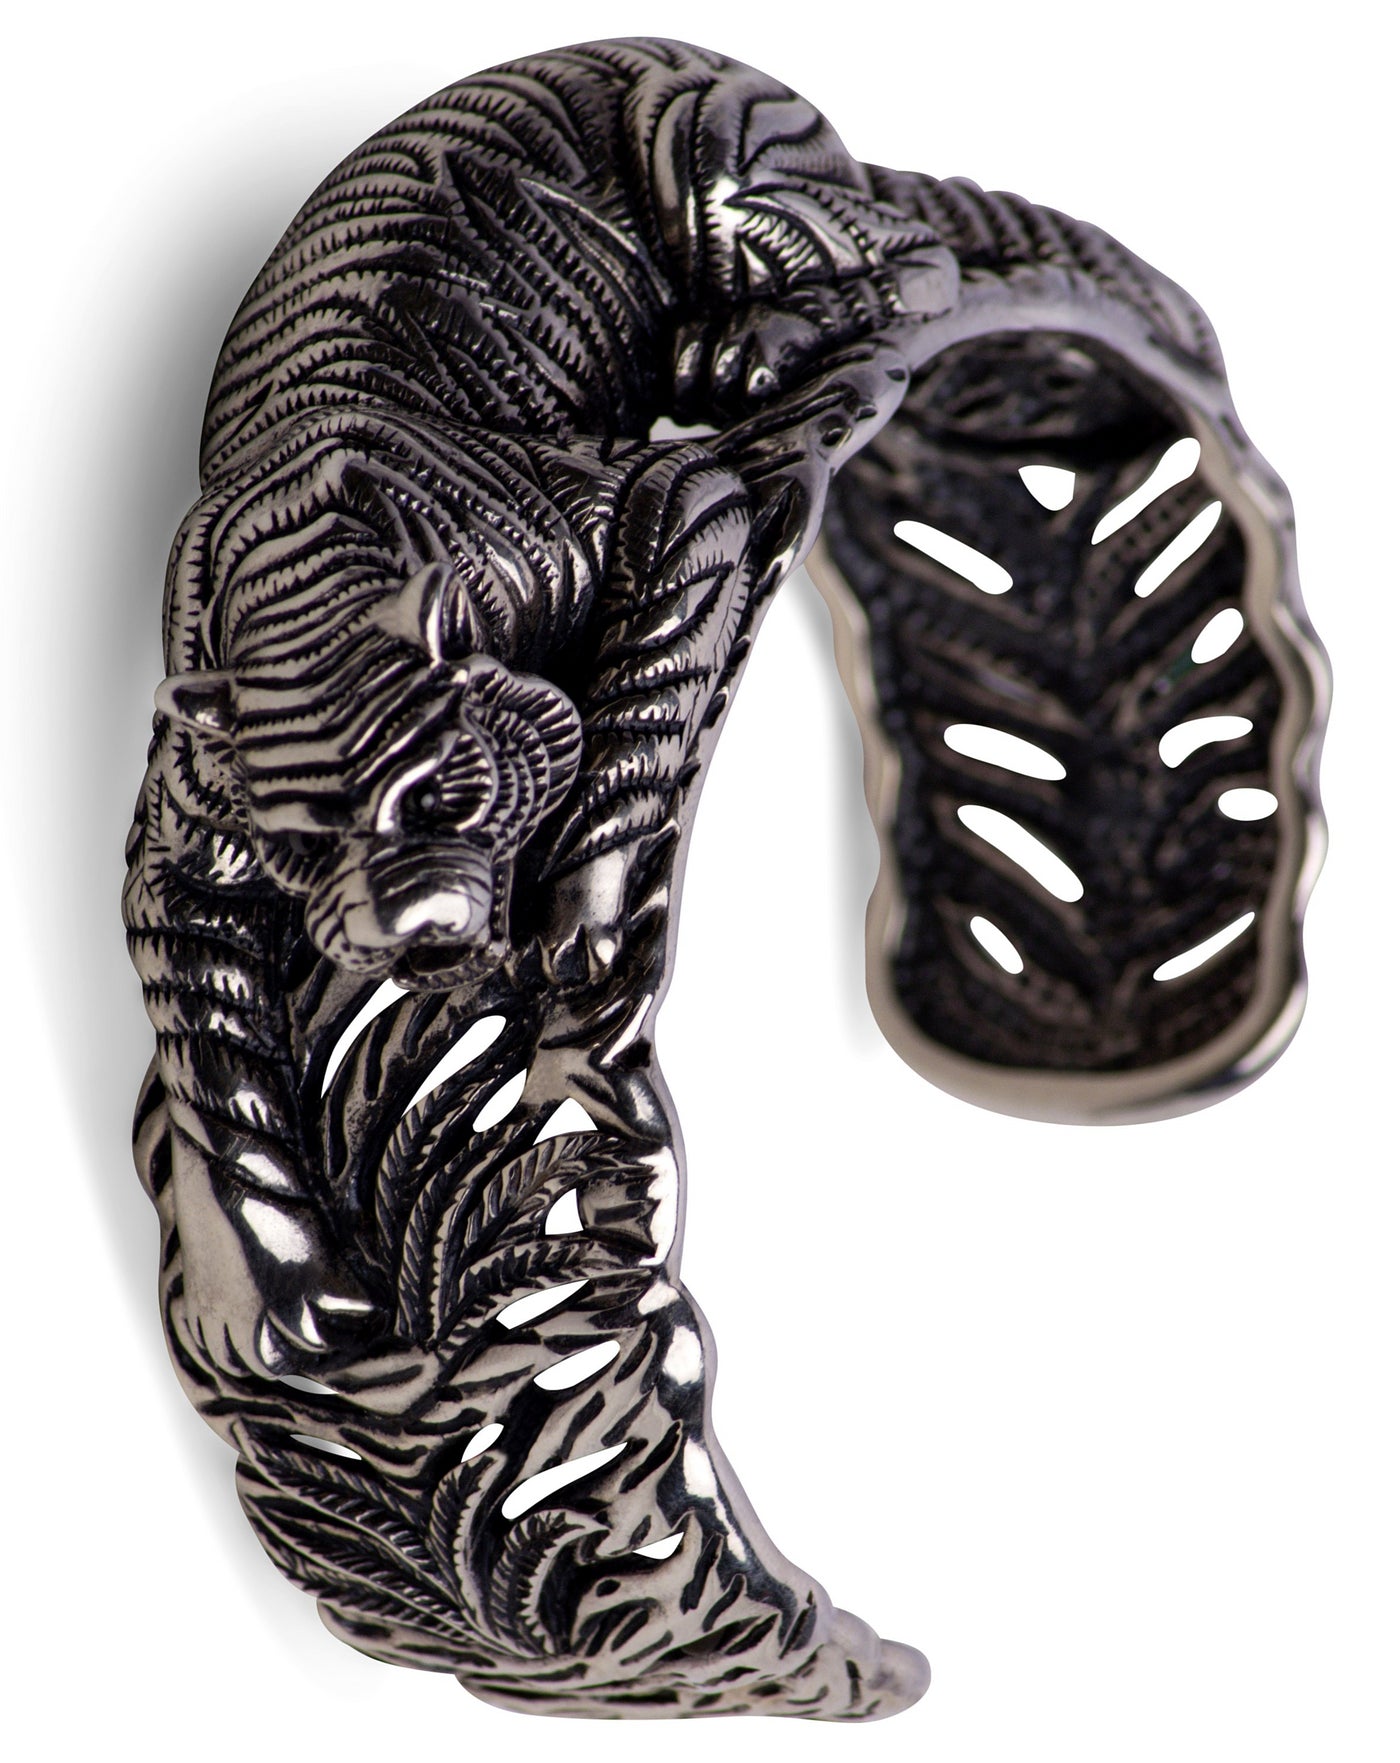 Crouching Tiger Hinged Silver Cuff Bracelet